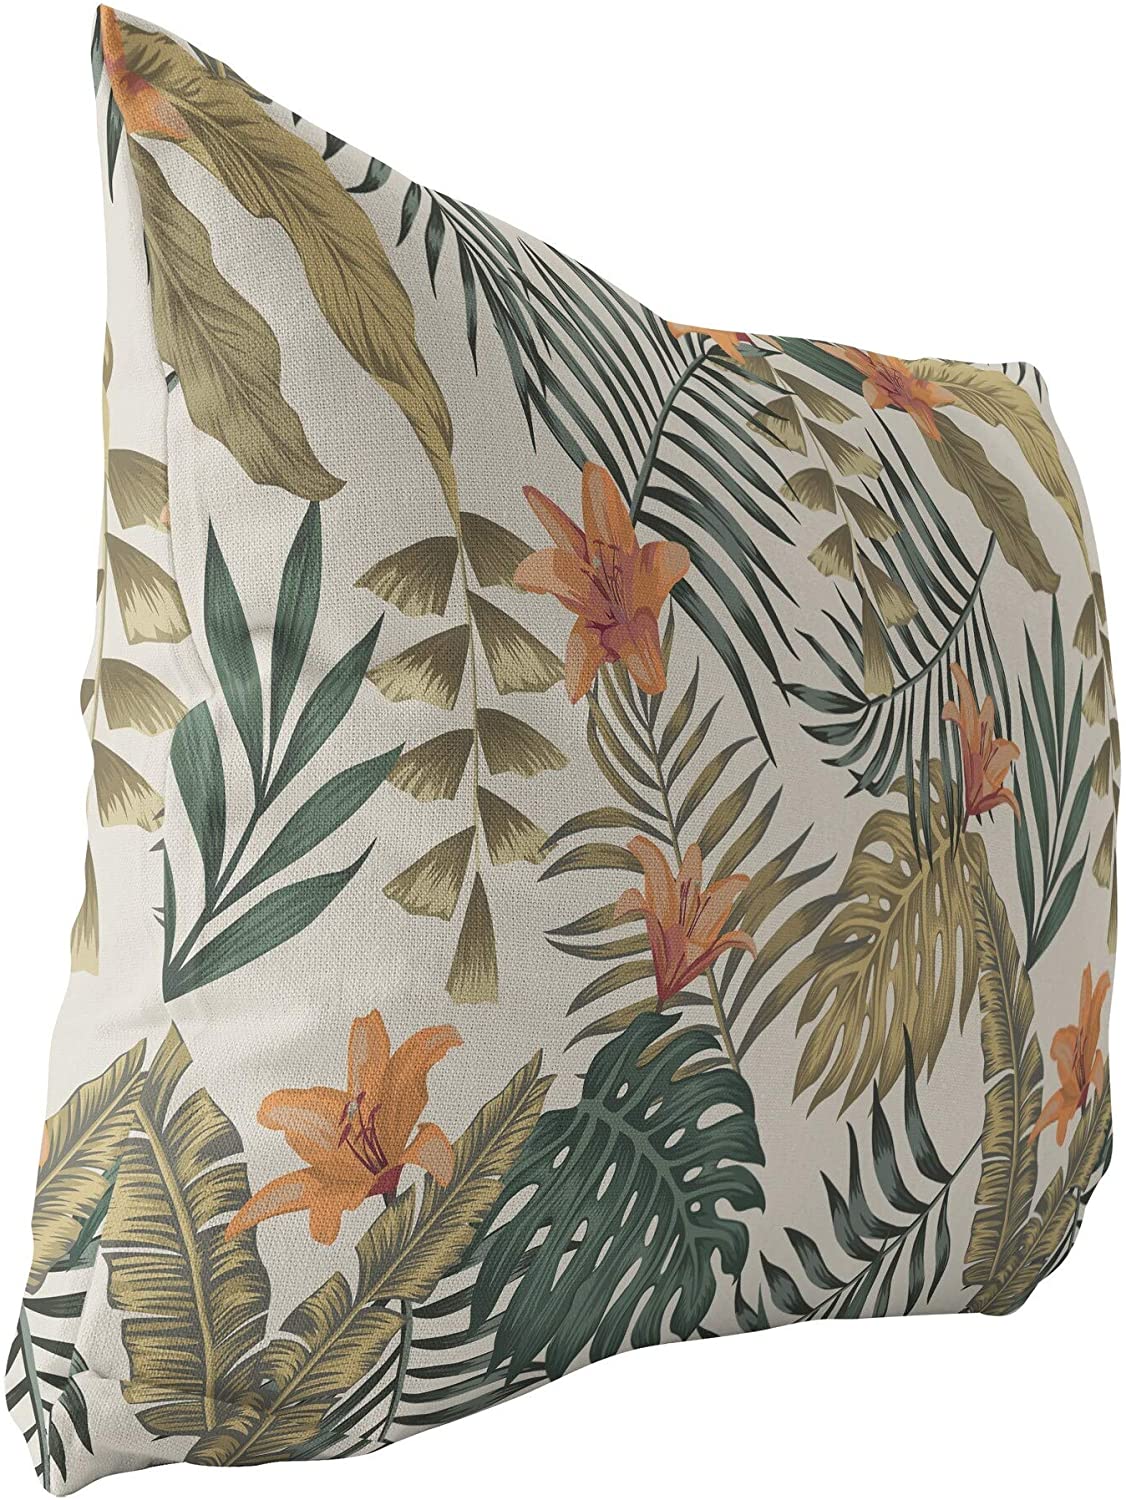 MISC Tropical Leaves Flowers Indoor|Outdoor Lumbar Pillow 20x14 Green Floral Tropical Polyester Removable Cover